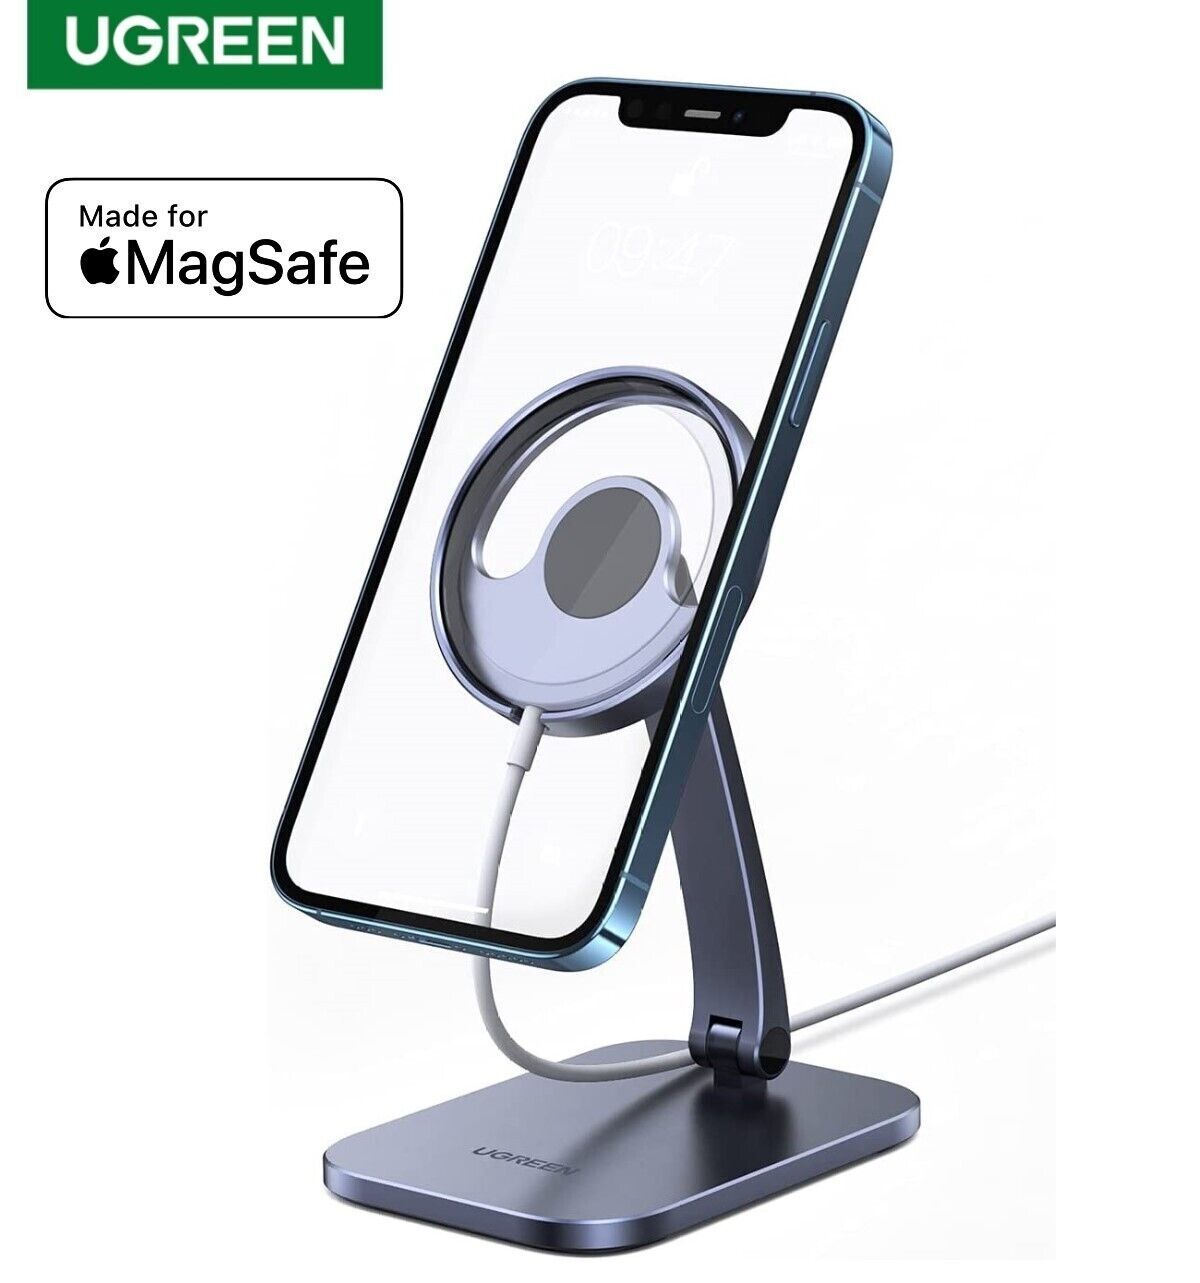 Ugreen Phone Stand for Magsafe Charger Desk Adjustable and Foldable  Aluminum - 40290